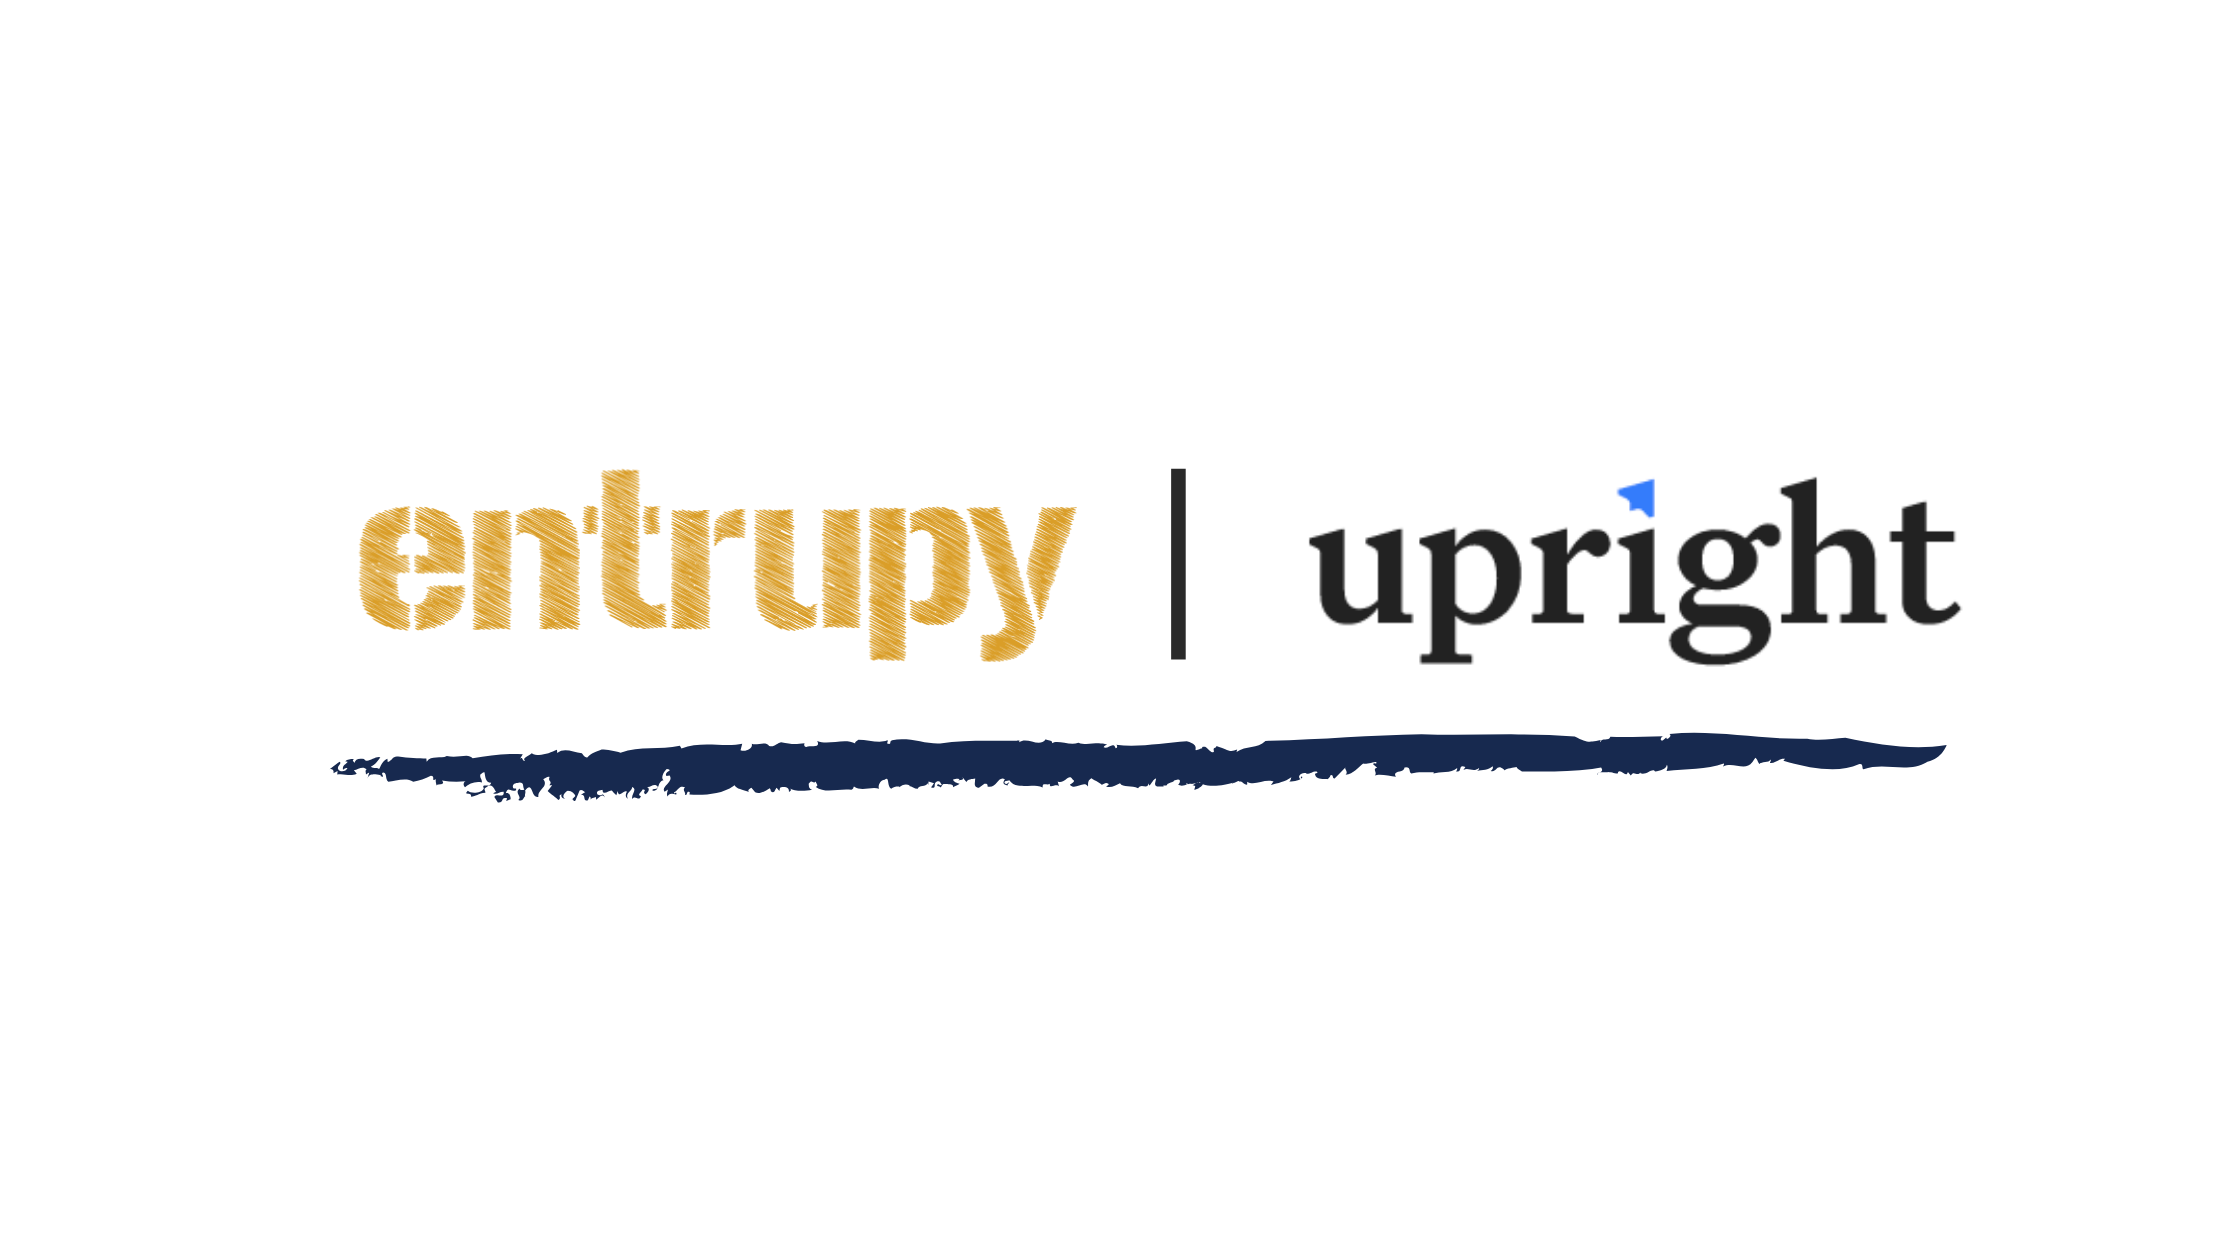 Entrupy is proud to announce a partnership with Upright Labs to enhance  online listings for Goodwill clients - Entrupy